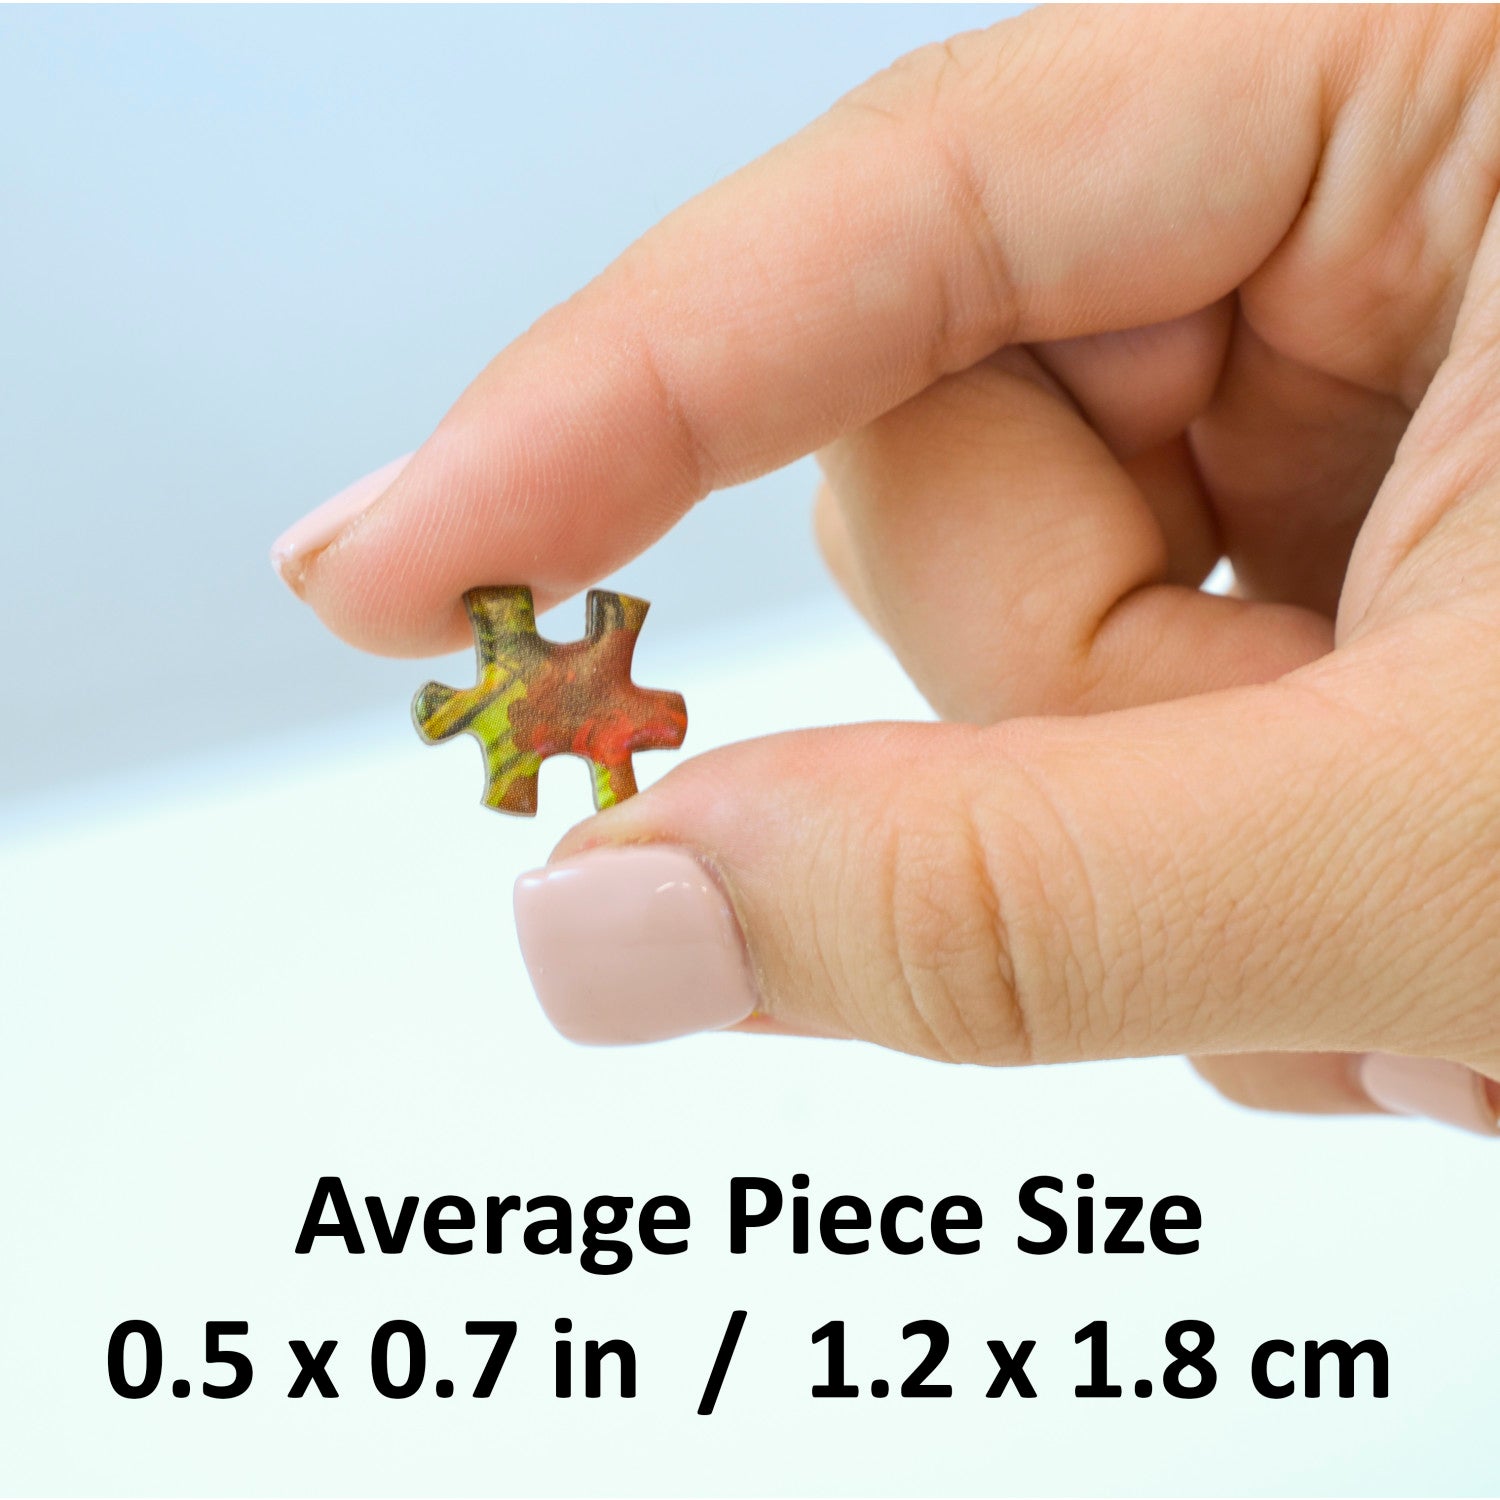 World's Smallest - High Performance 1000 Piece Jigsaw Puzzle